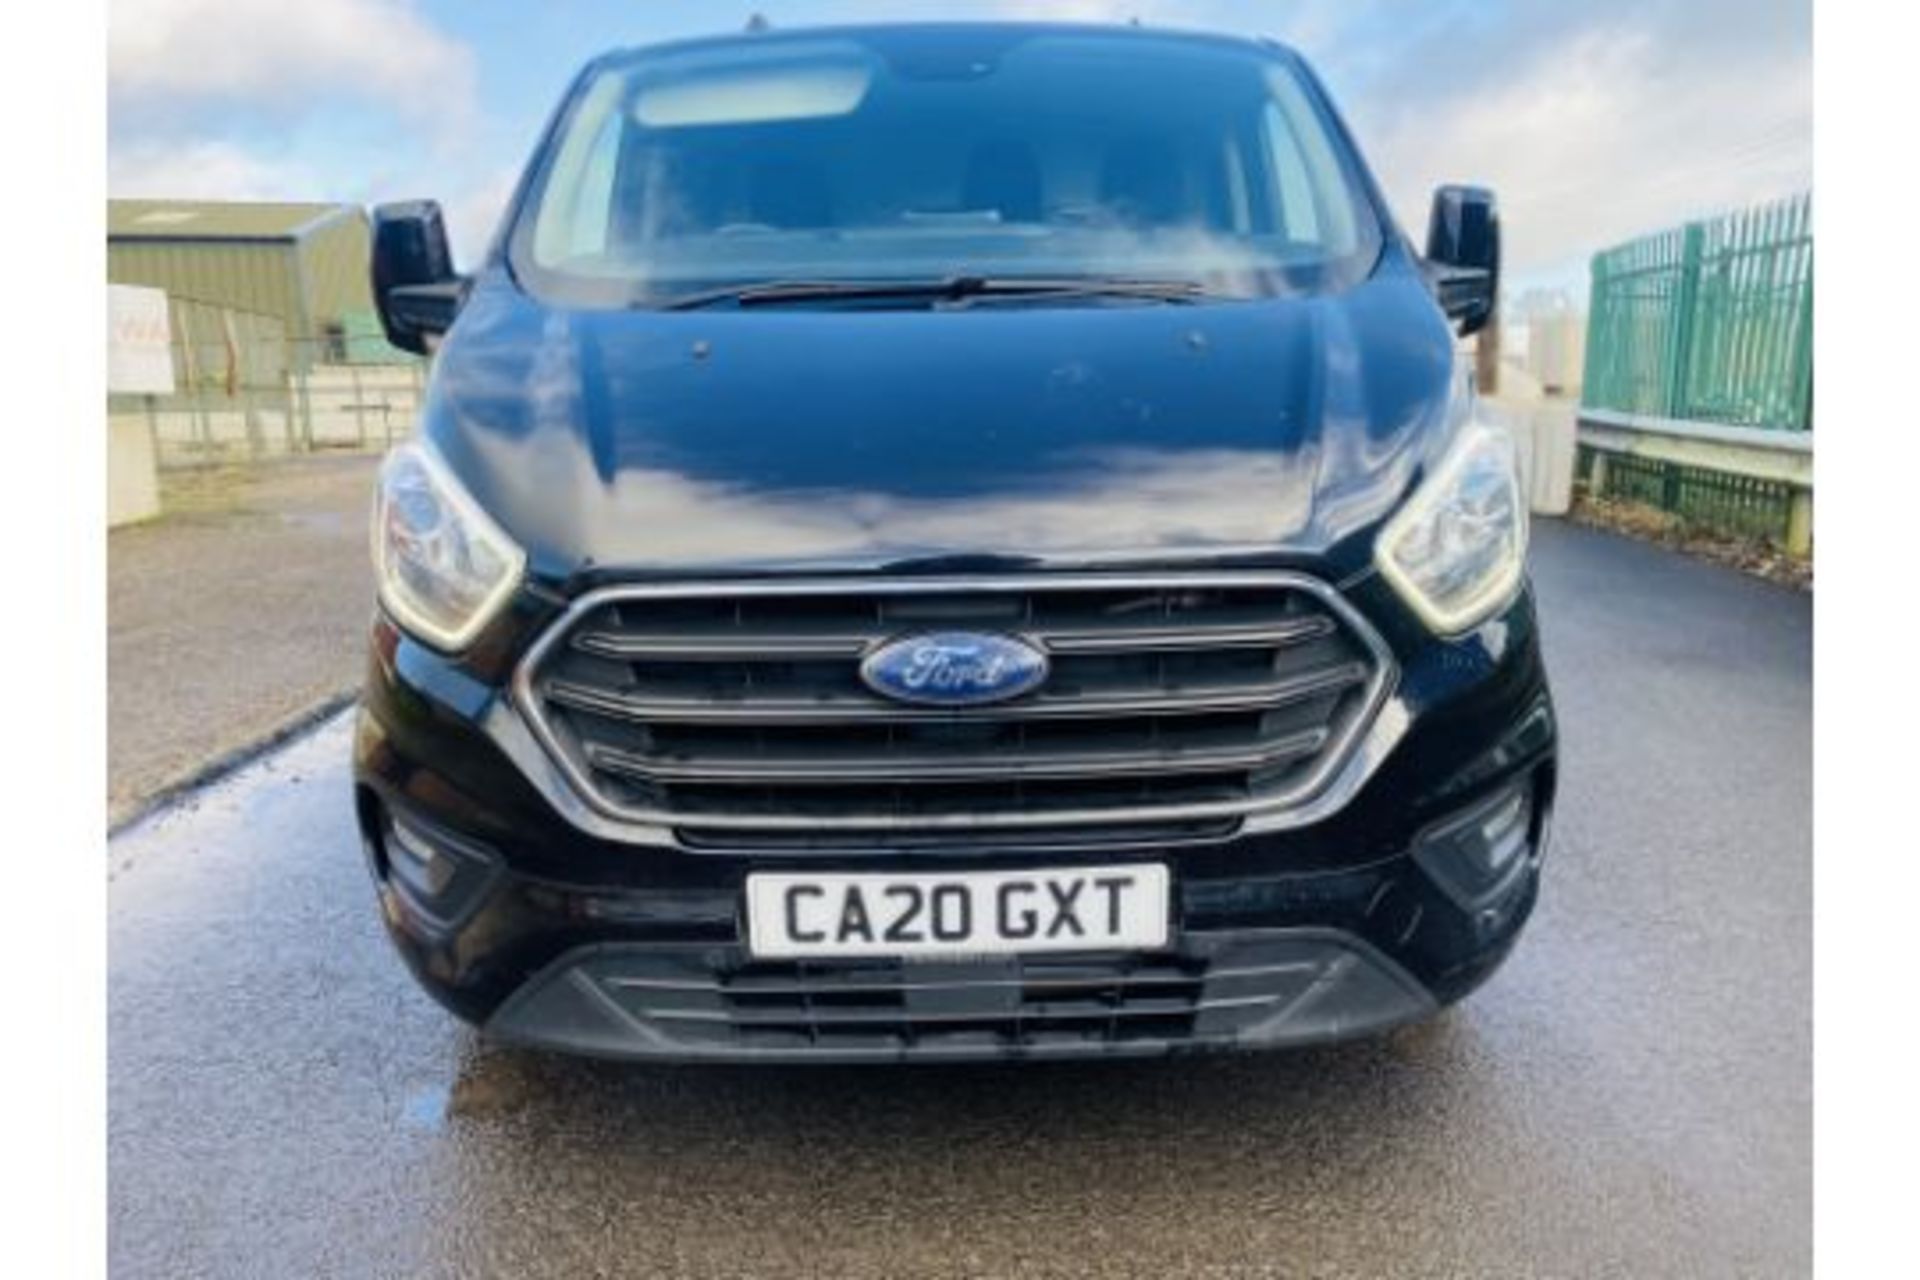 Ford Transit Custom " LIMITED " 280 170BHP "AUTOMATIC" 2.0TDCI 2020 20 Reg - Air Con - Heated Seats - Image 2 of 23